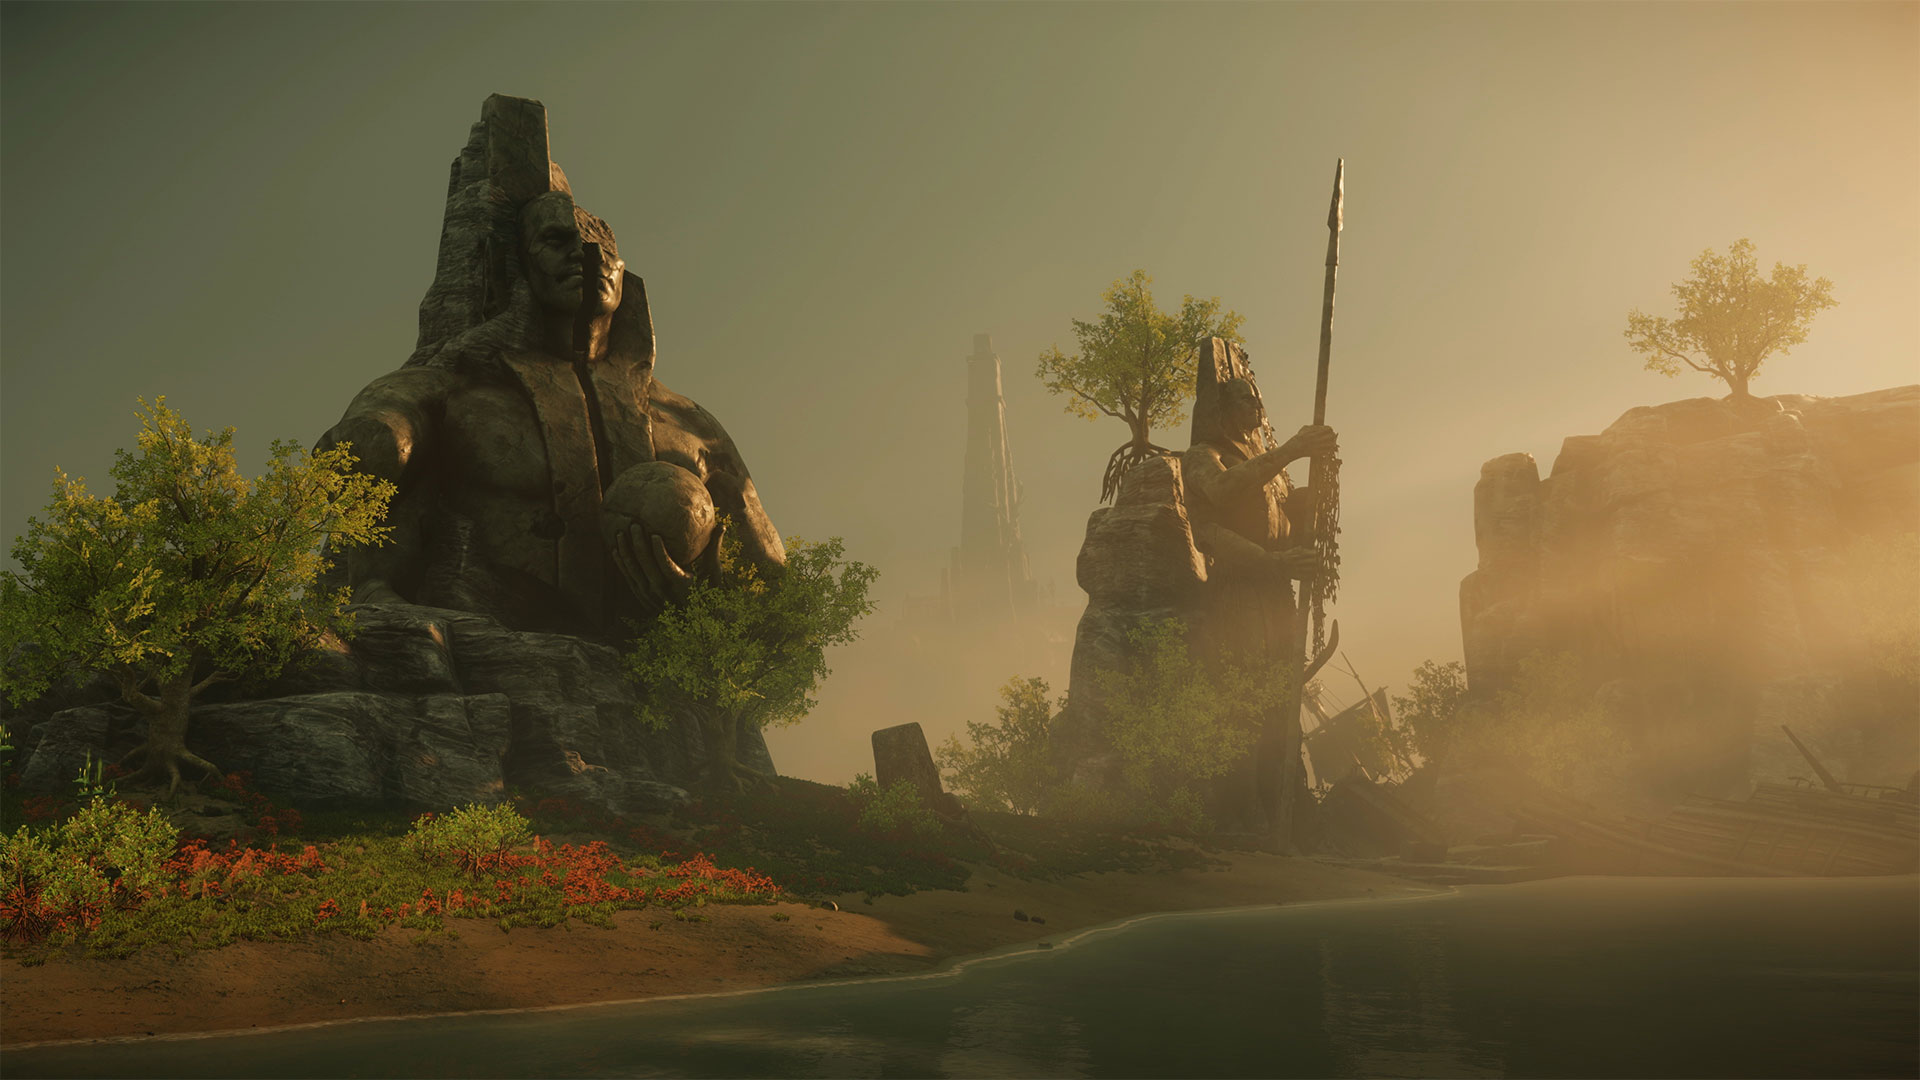 A beachfront on Aeternum. Huge statues loom over the rocky shore. 